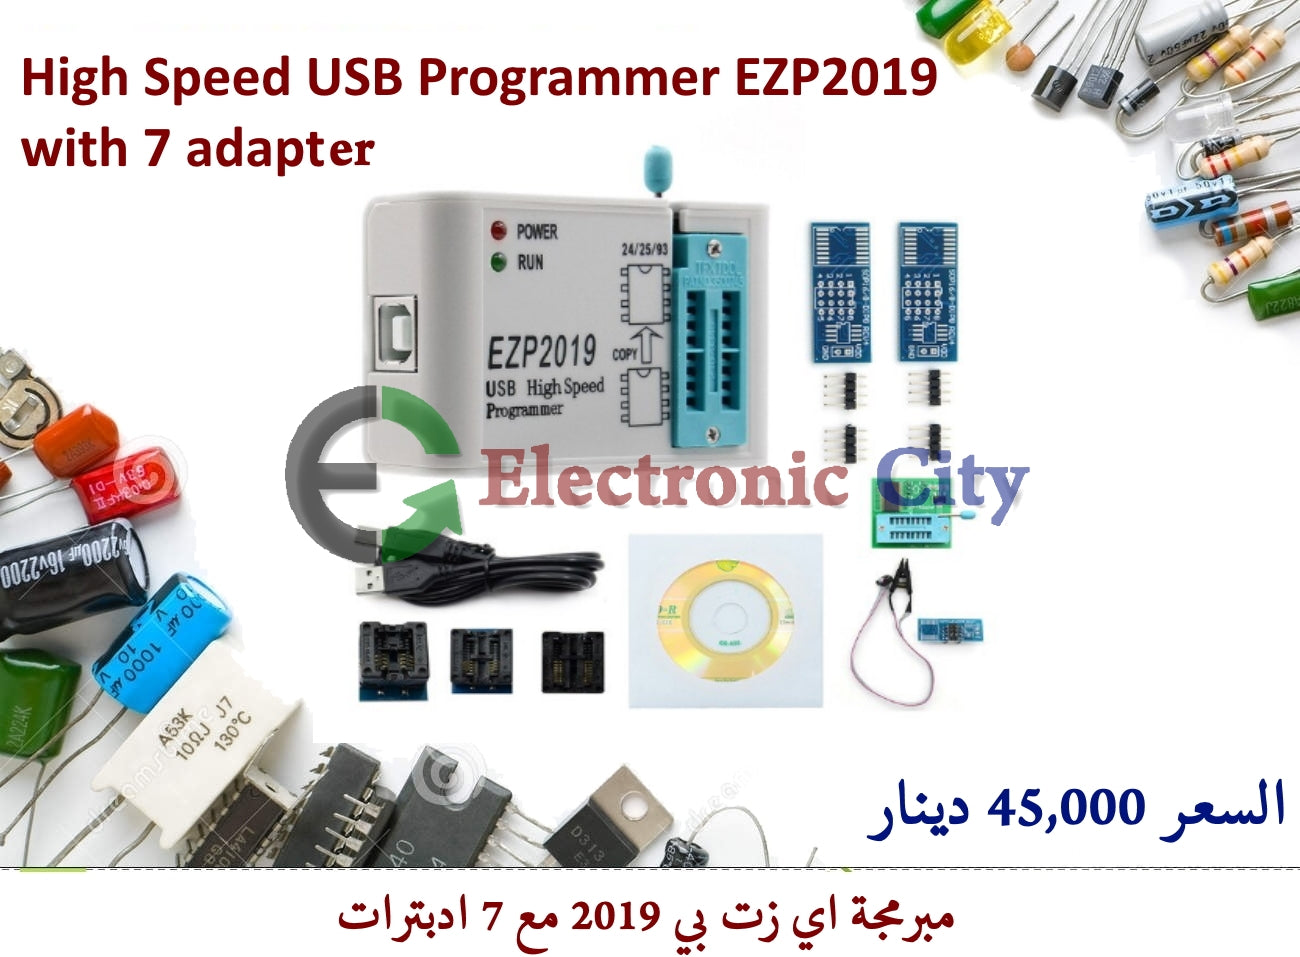 USB Programmer EZP2019 with  adapters #K8 XF0119-03